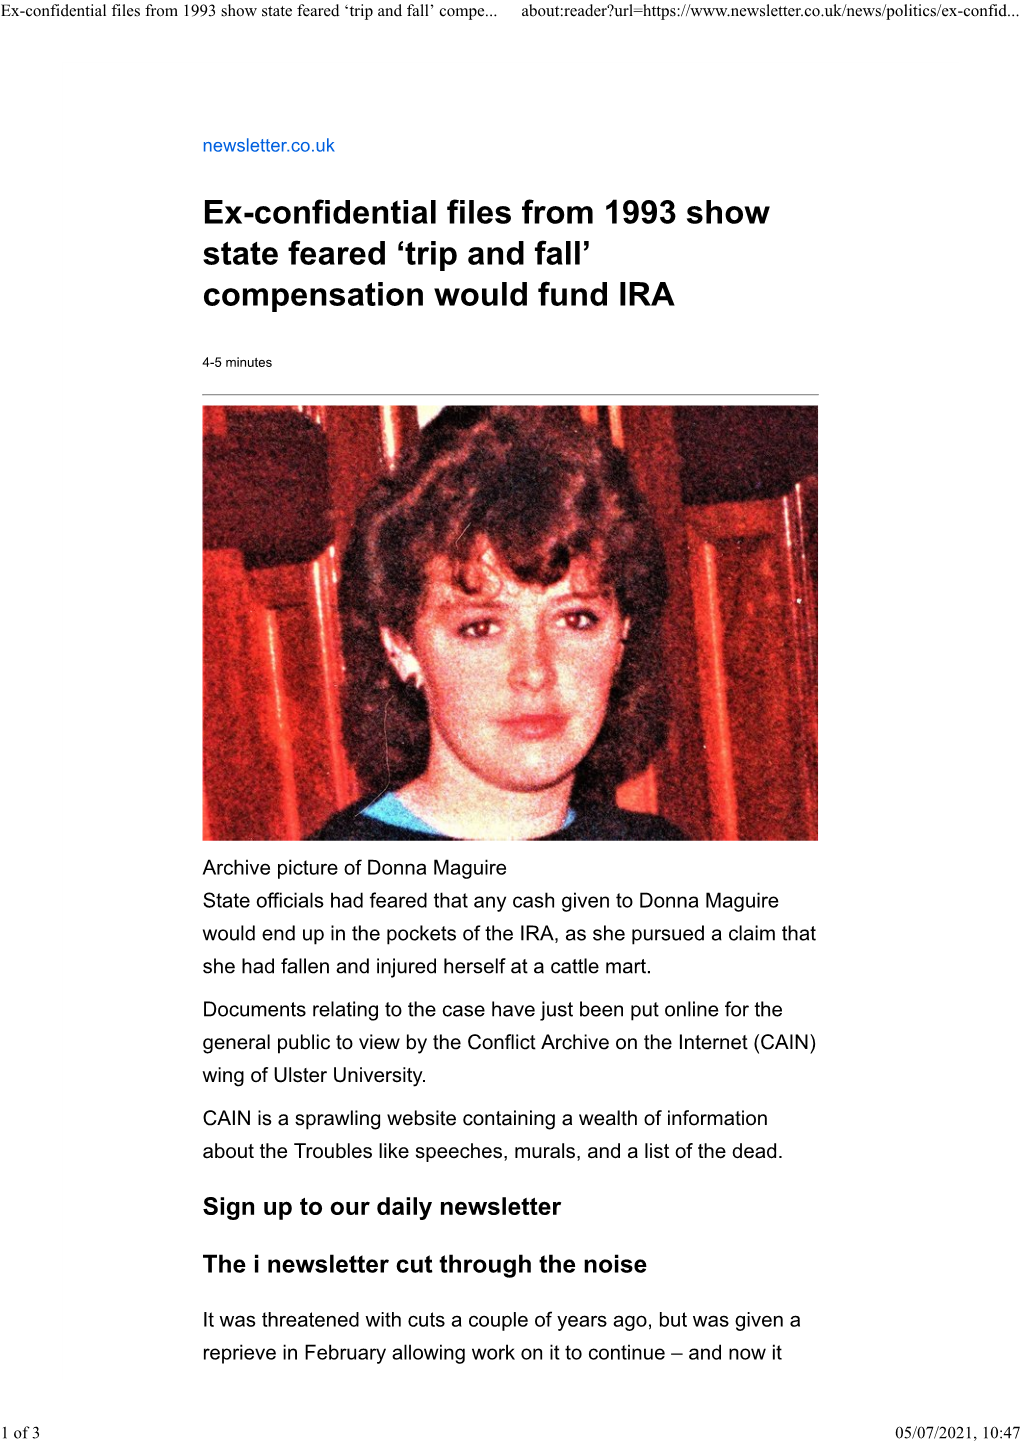 Ex-Confidential Files from 1993 Show State Feared ‘Trip and Fall’ Compe